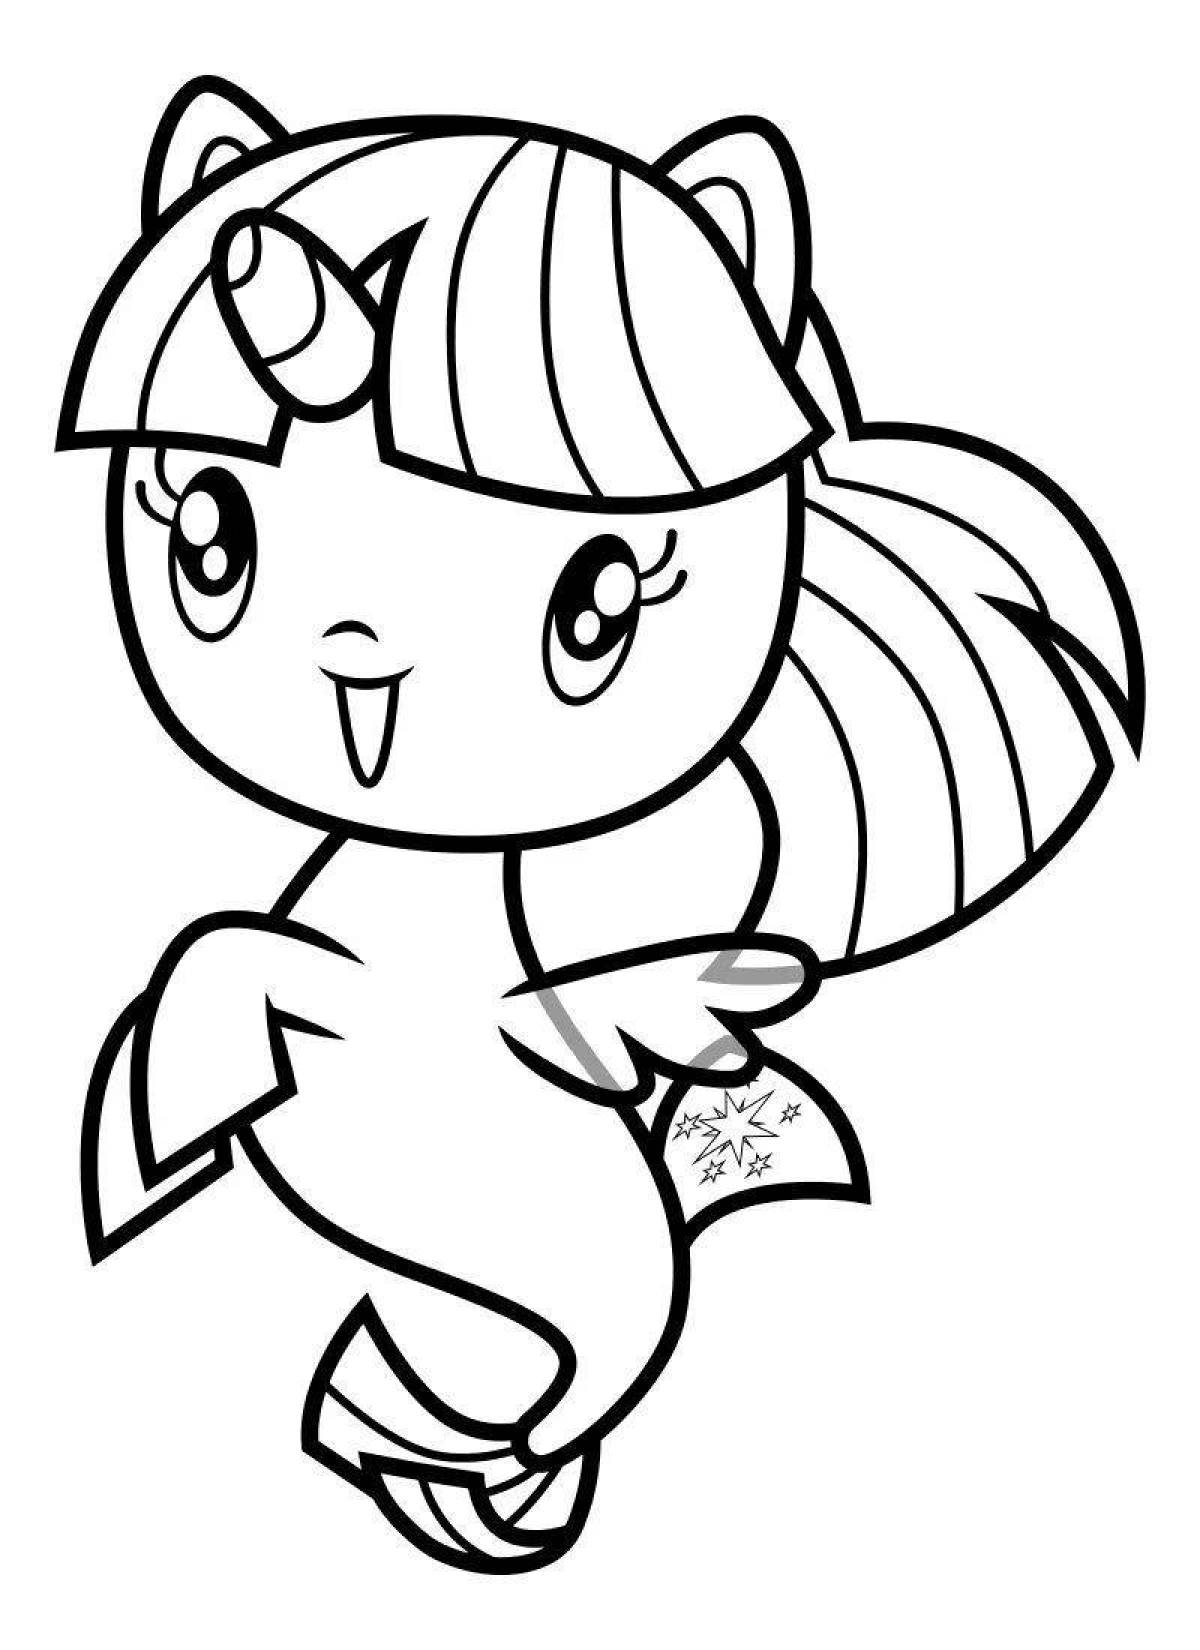 Cute pony cuties coloring book for girls